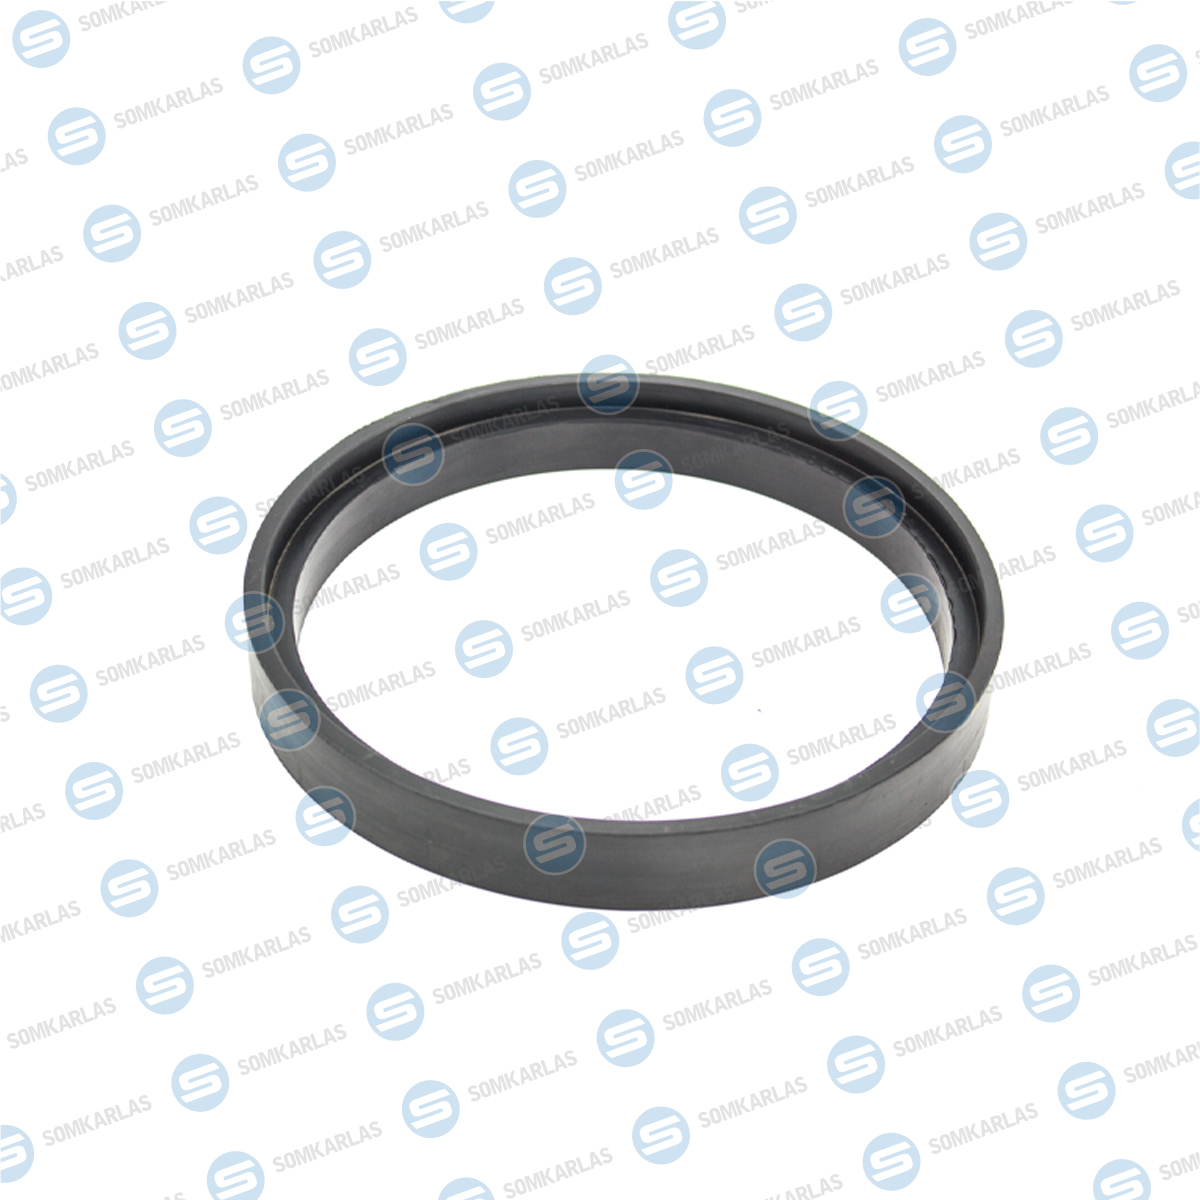 SOM20006 - THRUST RING WITH STEEL - 